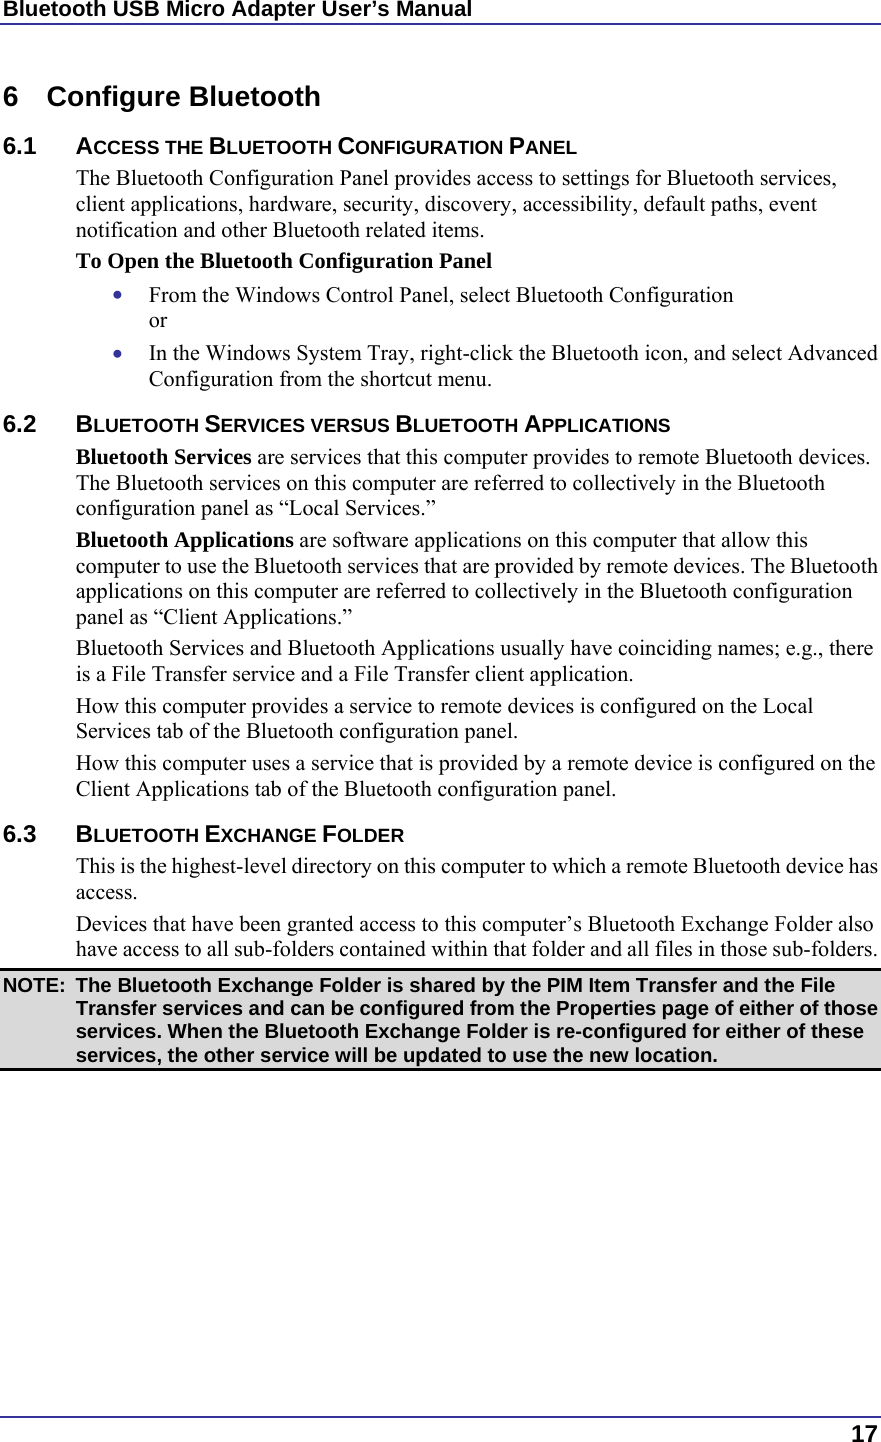 Bluetooth USB Micro Adapter User’s Manual  17 6 Configure Bluetooth 6.1 ACCESS THE BLUETOOTH CONFIGURATION PANEL The Bluetooth Configuration Panel provides access to settings for Bluetooth services, client applications, hardware, security, discovery, accessibility, default paths, event notification and other Bluetooth related items. To Open the Bluetooth Configuration Panel •  From the Windows Control Panel, select Bluetooth Configuration or •  In the Windows System Tray, right-click the Bluetooth icon, and select Advanced Configuration from the shortcut menu. 6.2 BLUETOOTH SERVICES VERSUS BLUETOOTH APPLICATIONS Bluetooth Services are services that this computer provides to remote Bluetooth devices. The Bluetooth services on this computer are referred to collectively in the Bluetooth configuration panel as “Local Services.” Bluetooth Applications are software applications on this computer that allow this computer to use the Bluetooth services that are provided by remote devices. The Bluetooth applications on this computer are referred to collectively in the Bluetooth configuration panel as “Client Applications.” Bluetooth Services and Bluetooth Applications usually have coinciding names; e.g., there is a File Transfer service and a File Transfer client application. How this computer provides a service to remote devices is configured on the Local Services tab of the Bluetooth configuration panel. How this computer uses a service that is provided by a remote device is configured on the Client Applications tab of the Bluetooth configuration panel. 6.3 BLUETOOTH EXCHANGE FOLDER This is the highest-level directory on this computer to which a remote Bluetooth device has access. Devices that have been granted access to this computer’s Bluetooth Exchange Folder also have access to all sub-folders contained within that folder and all files in those sub-folders. NOTE:  The Bluetooth Exchange Folder is shared by the PIM Item Transfer and the File Transfer services and can be configured from the Properties page of either of those services. When the Bluetooth Exchange Folder is re-configured for either of these services, the other service will be updated to use the new location. 